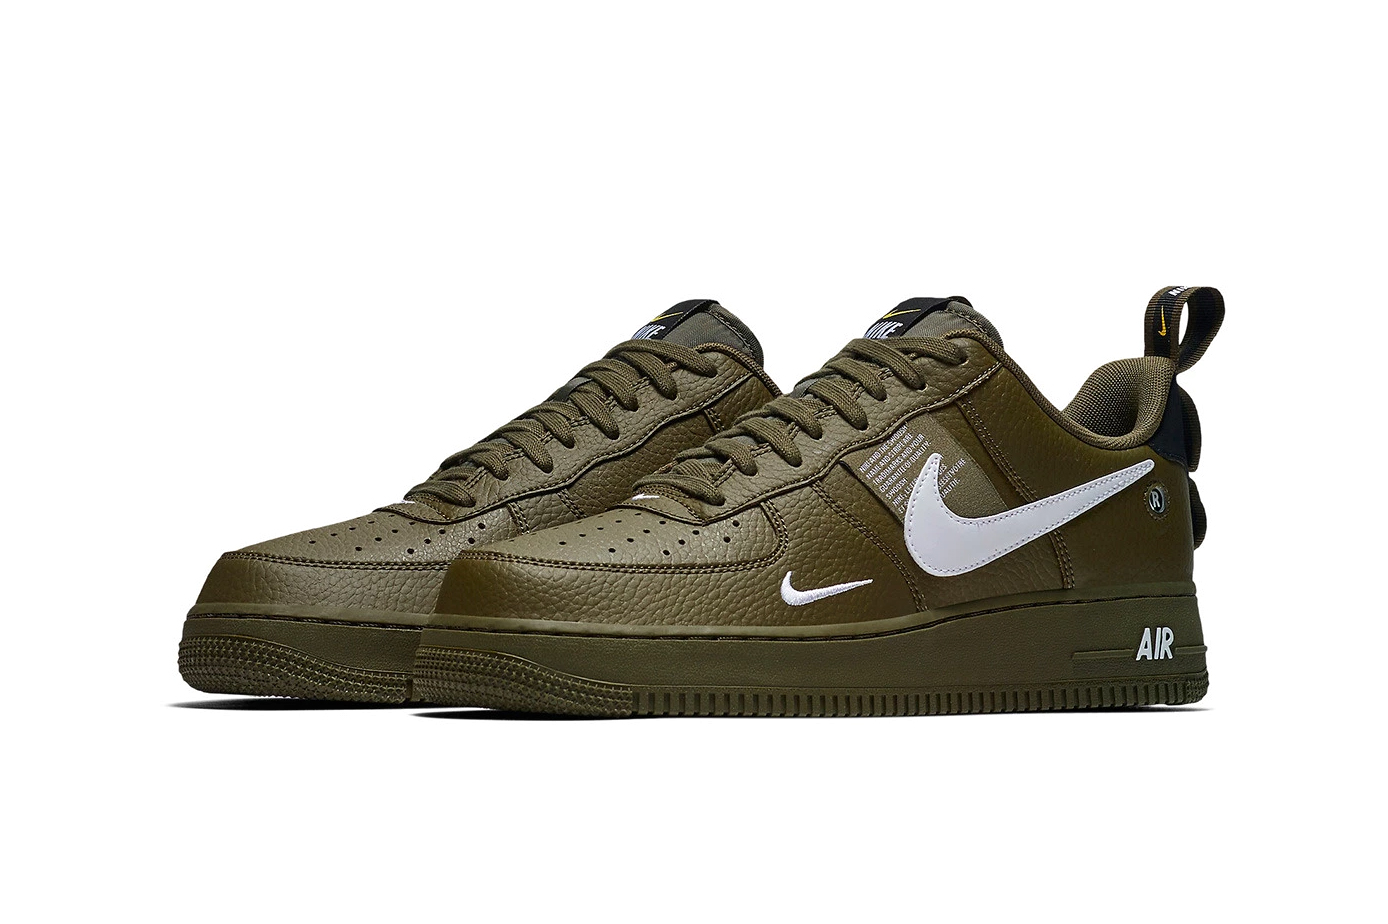 Nike Air Force 1 Low Utility “Olive Canvas”, Drops